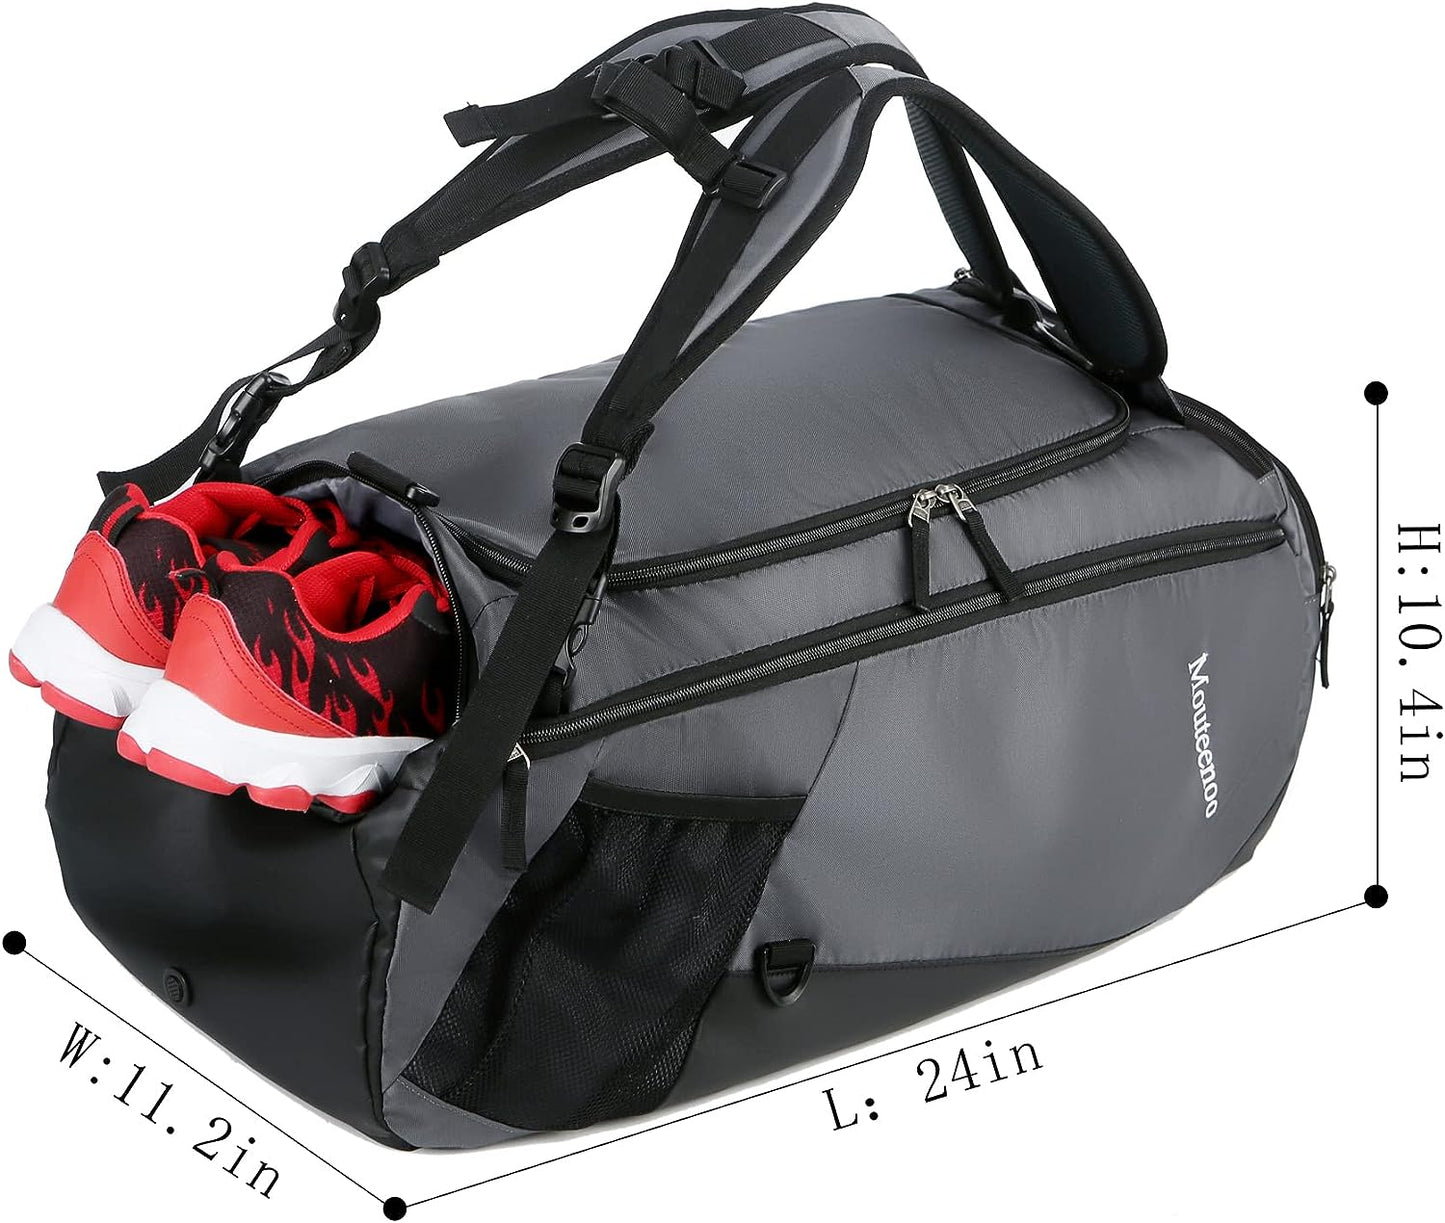 AUTHENTIC Travel Duffel Backpack with Shoes Compartment Water Resistant Sports Duffle Gym Bag With Shoulder Straps for Men and Women